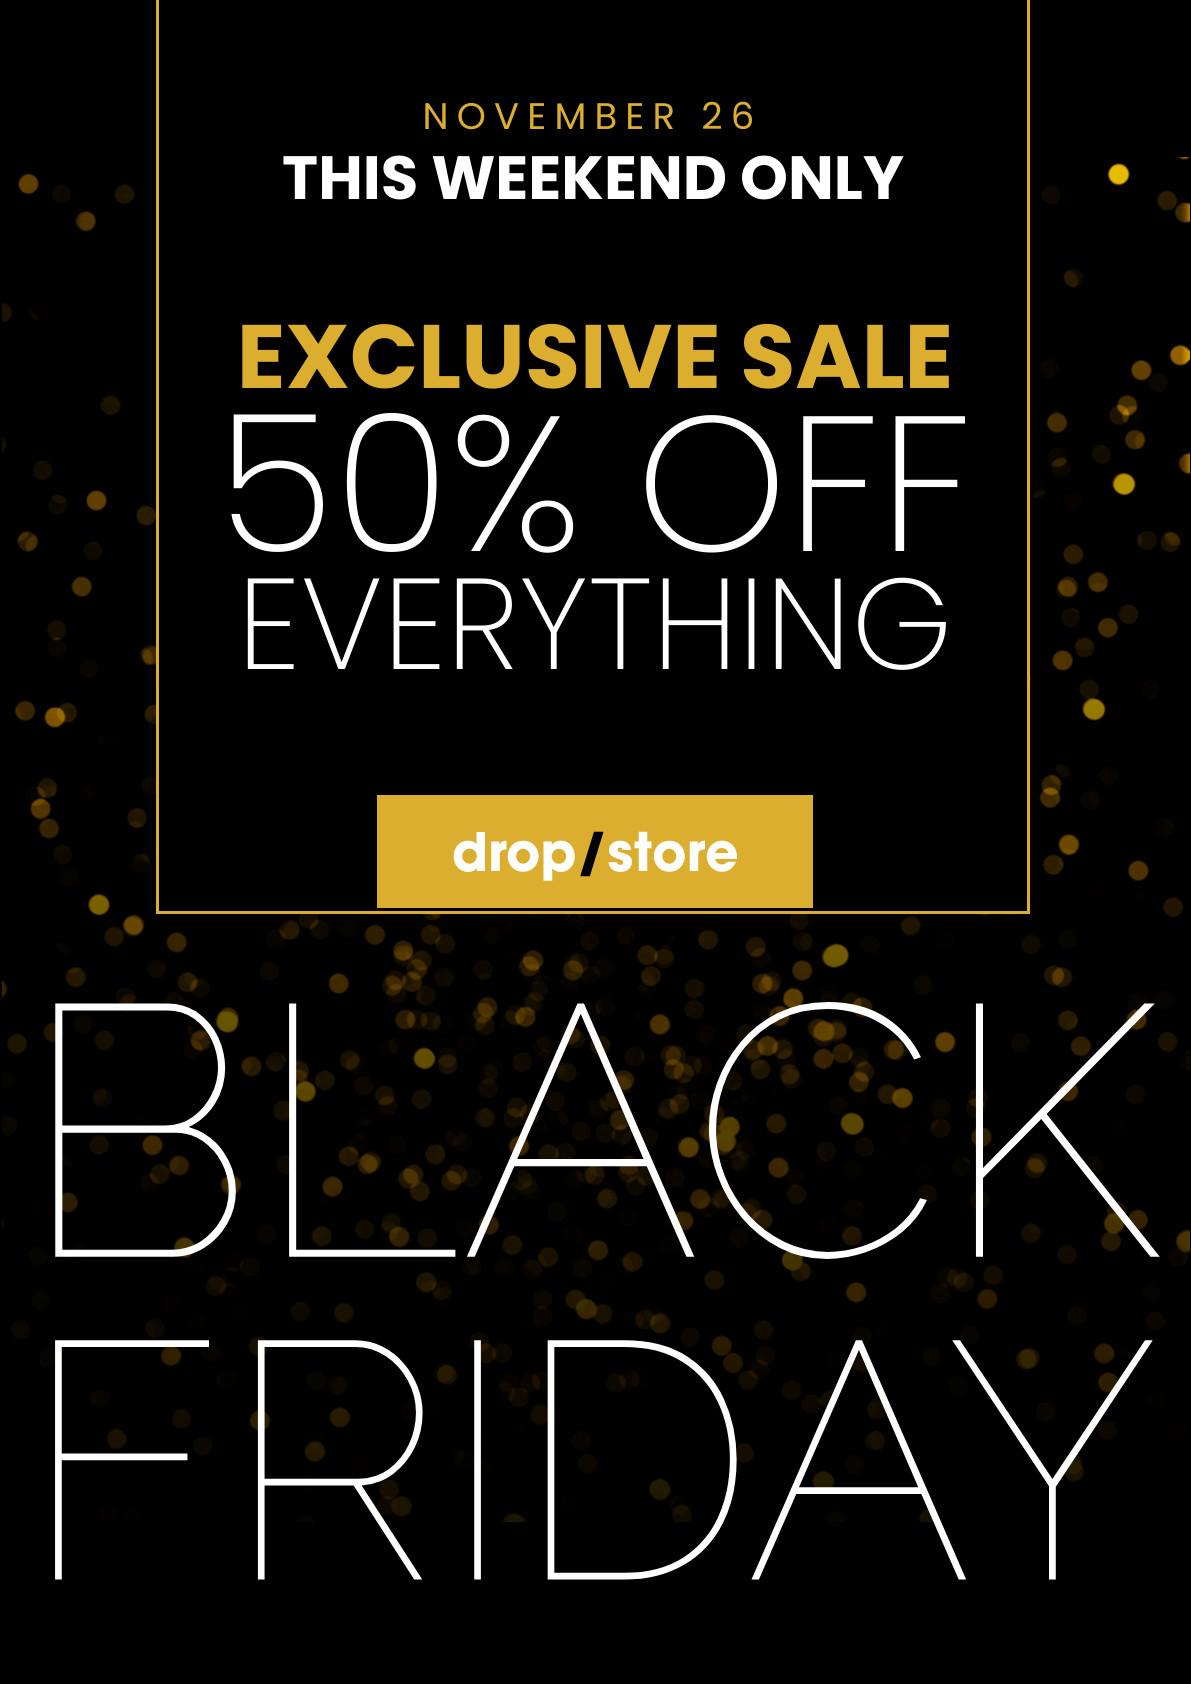 Black Friday Exclusive Gold Glitter Sales Poster